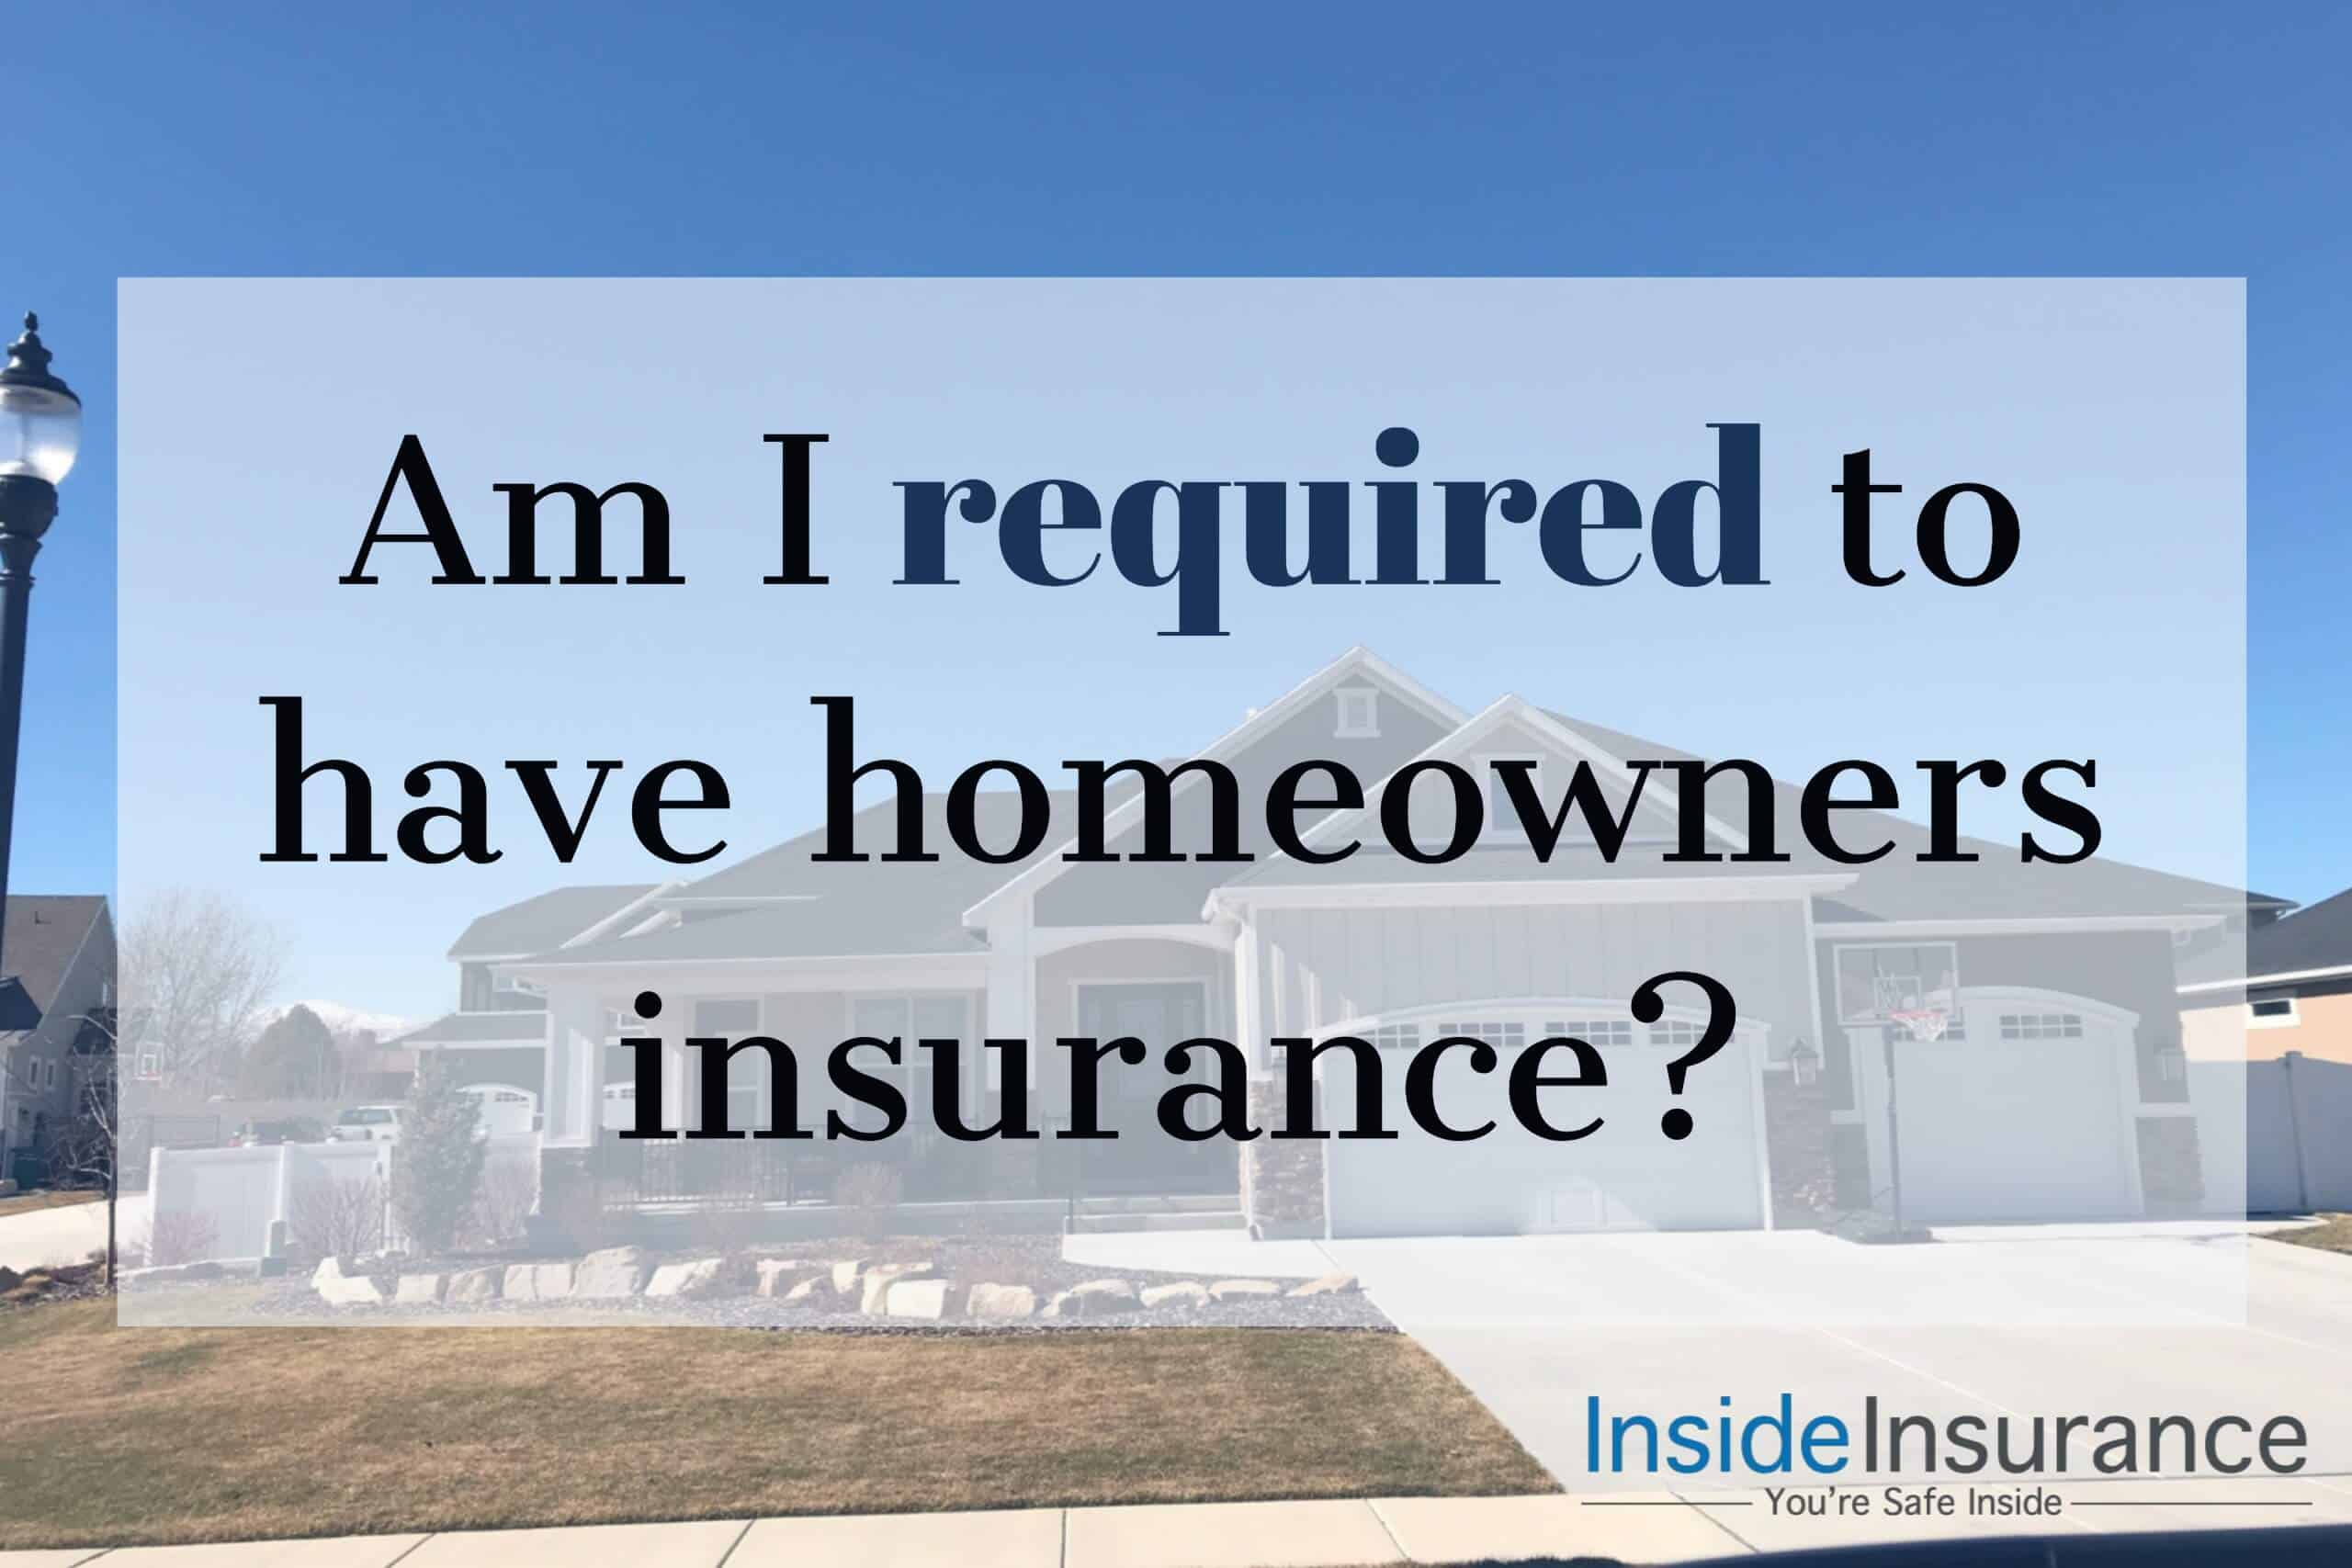 Am I required to have Home Insurance?